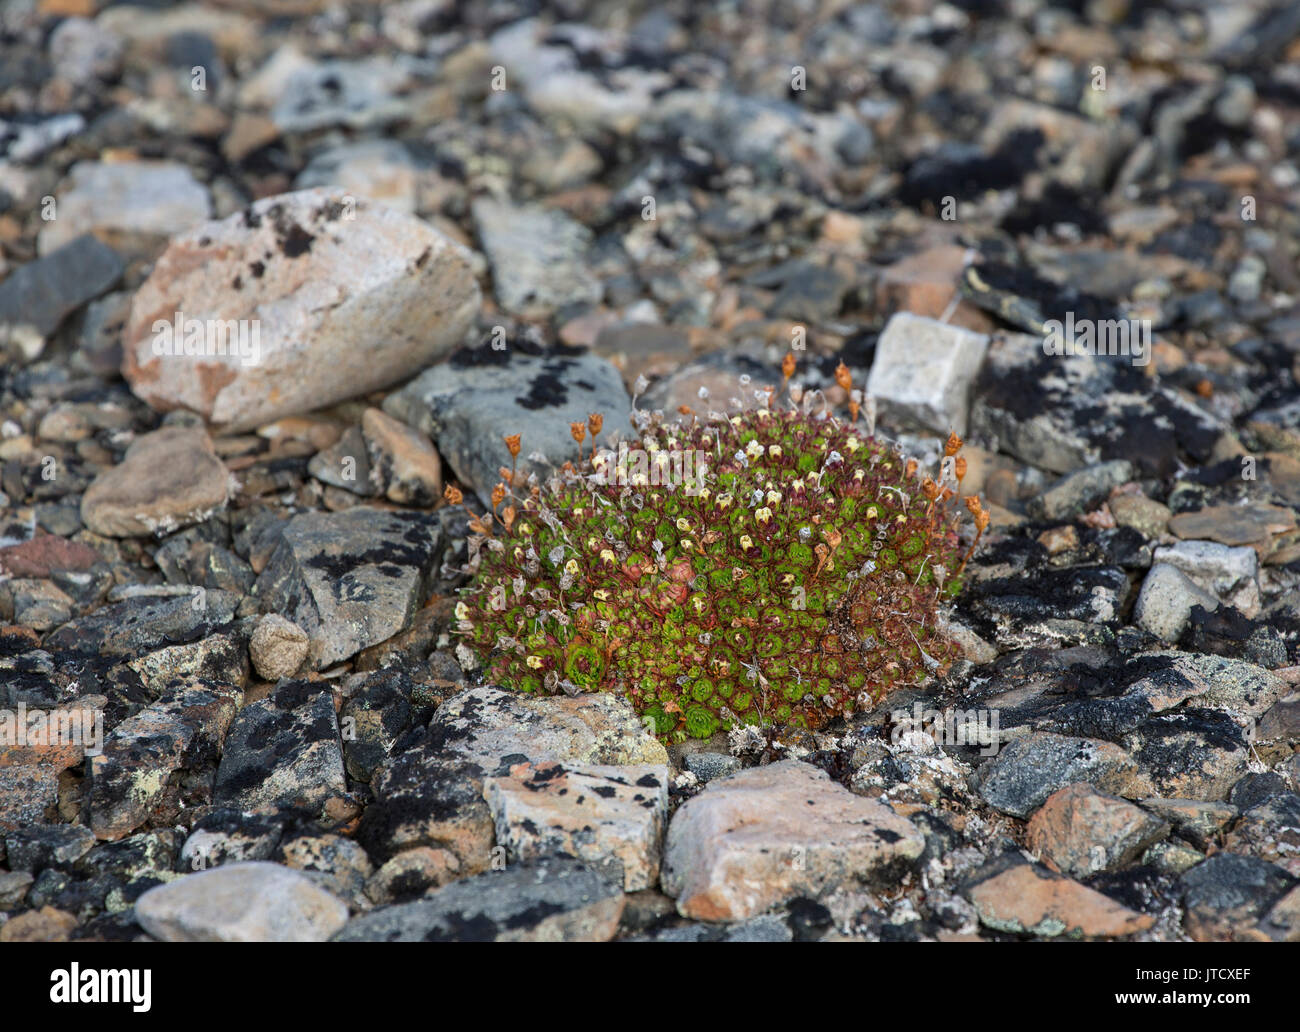 Tufted Saxifrage, Saxifraga cespitosa, compact plant before flowering, growing on the tundra. Taken in June, Spitsbergen, Svalbard, Norway Stock Photo